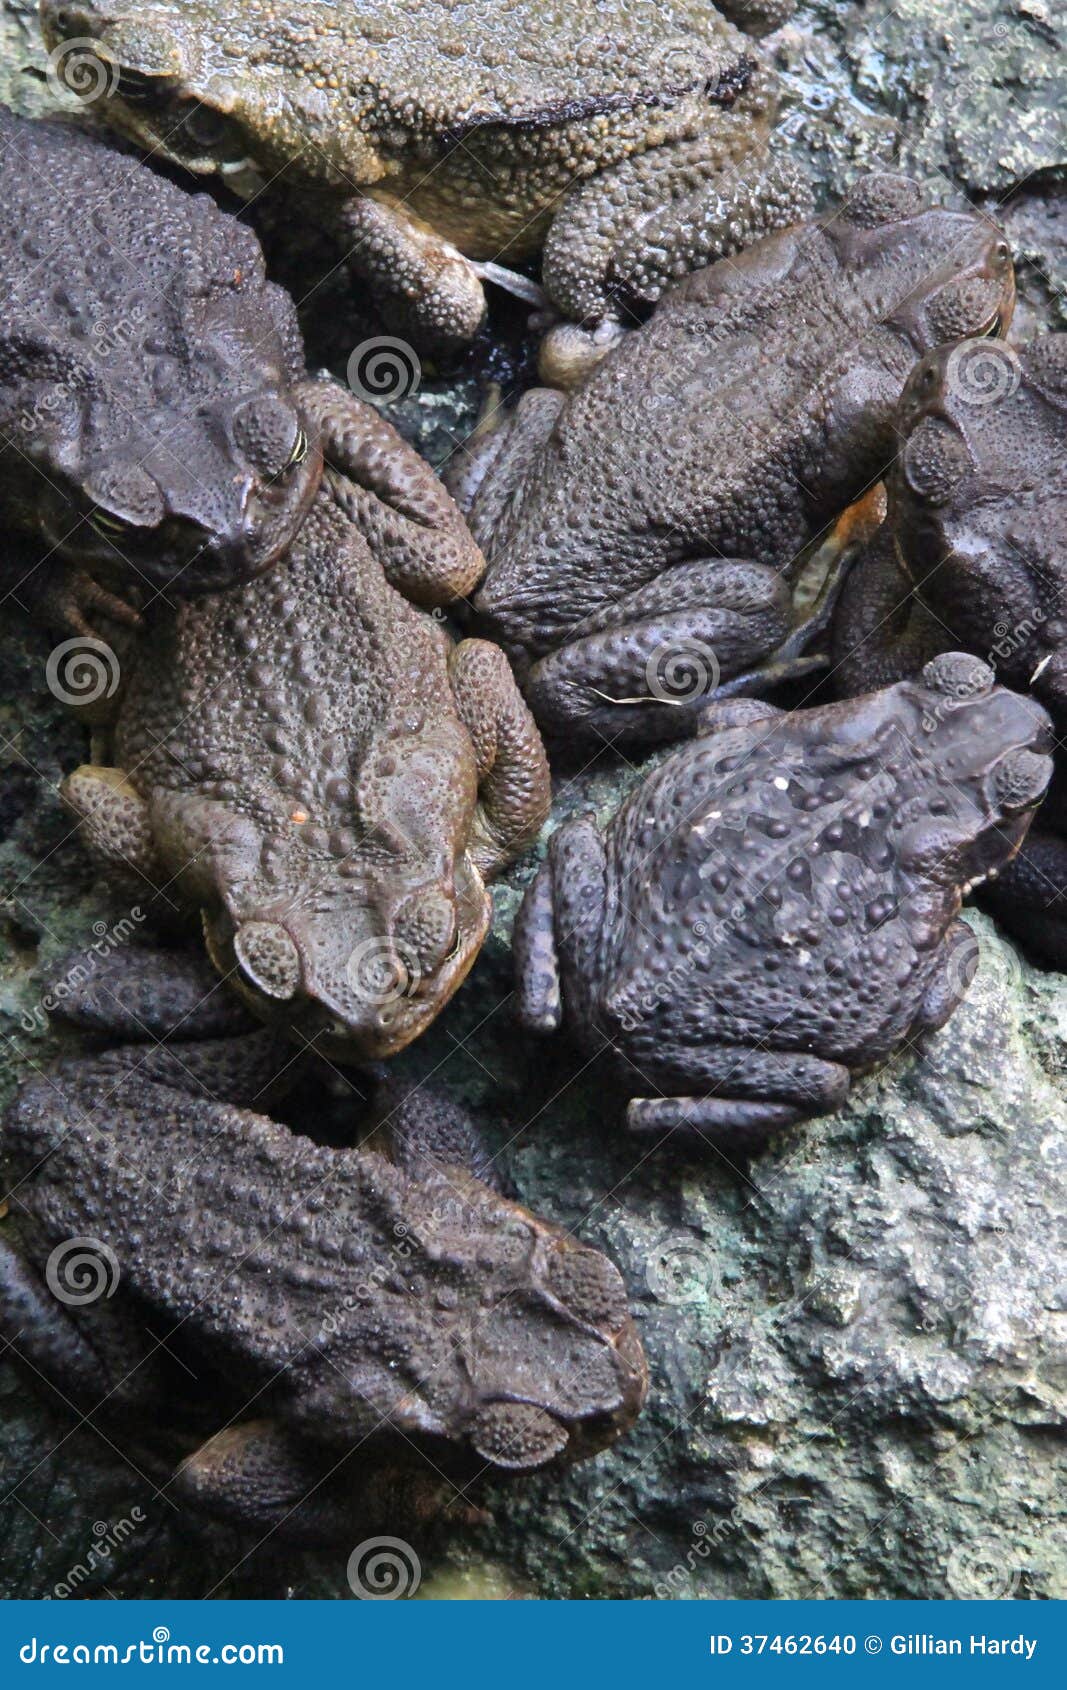 Group Of Toads 121